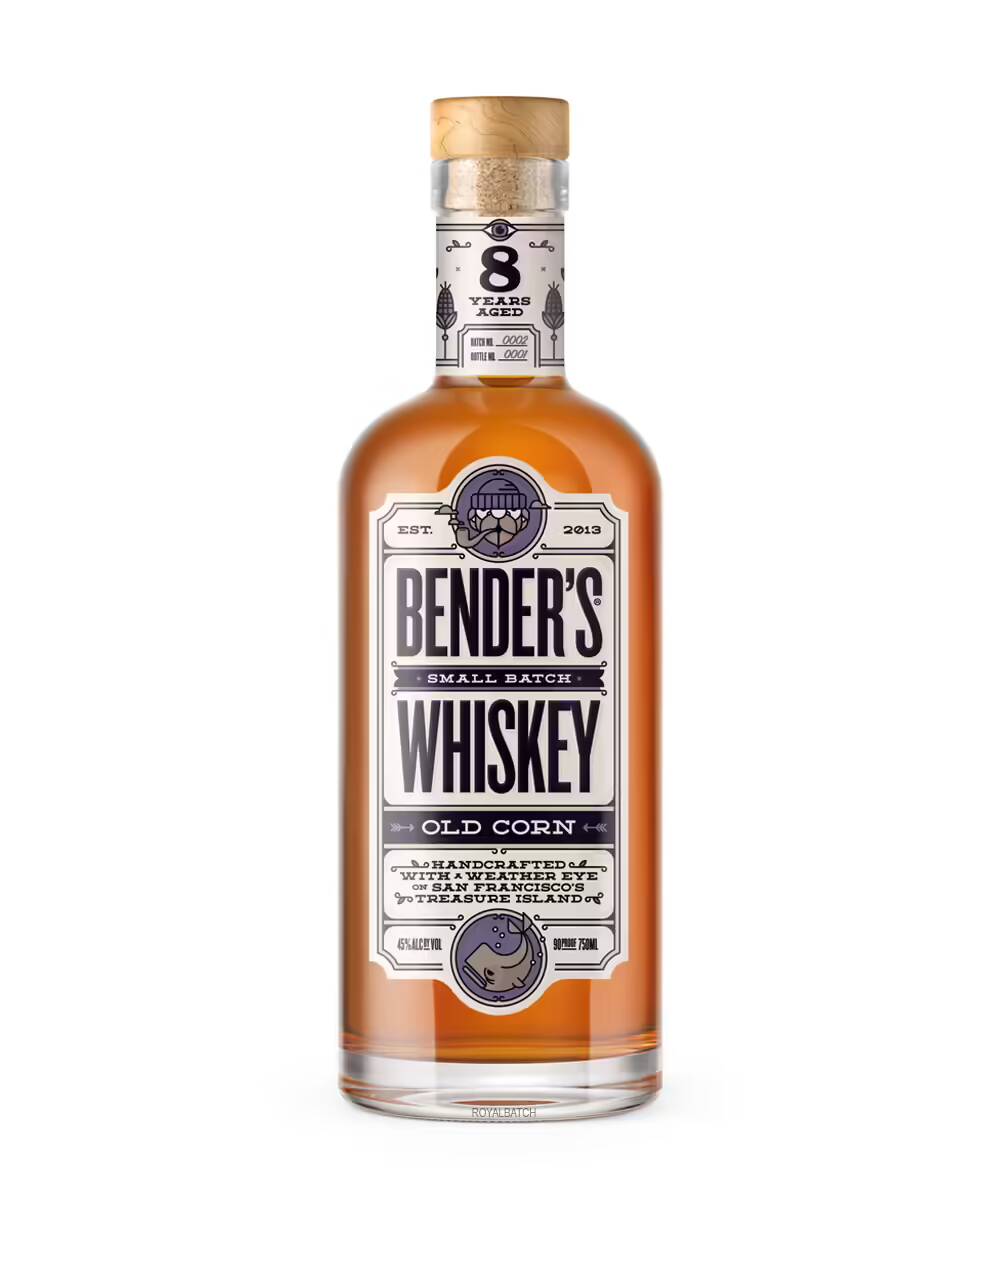 Bender's 8 Year Old Corn Whiskey